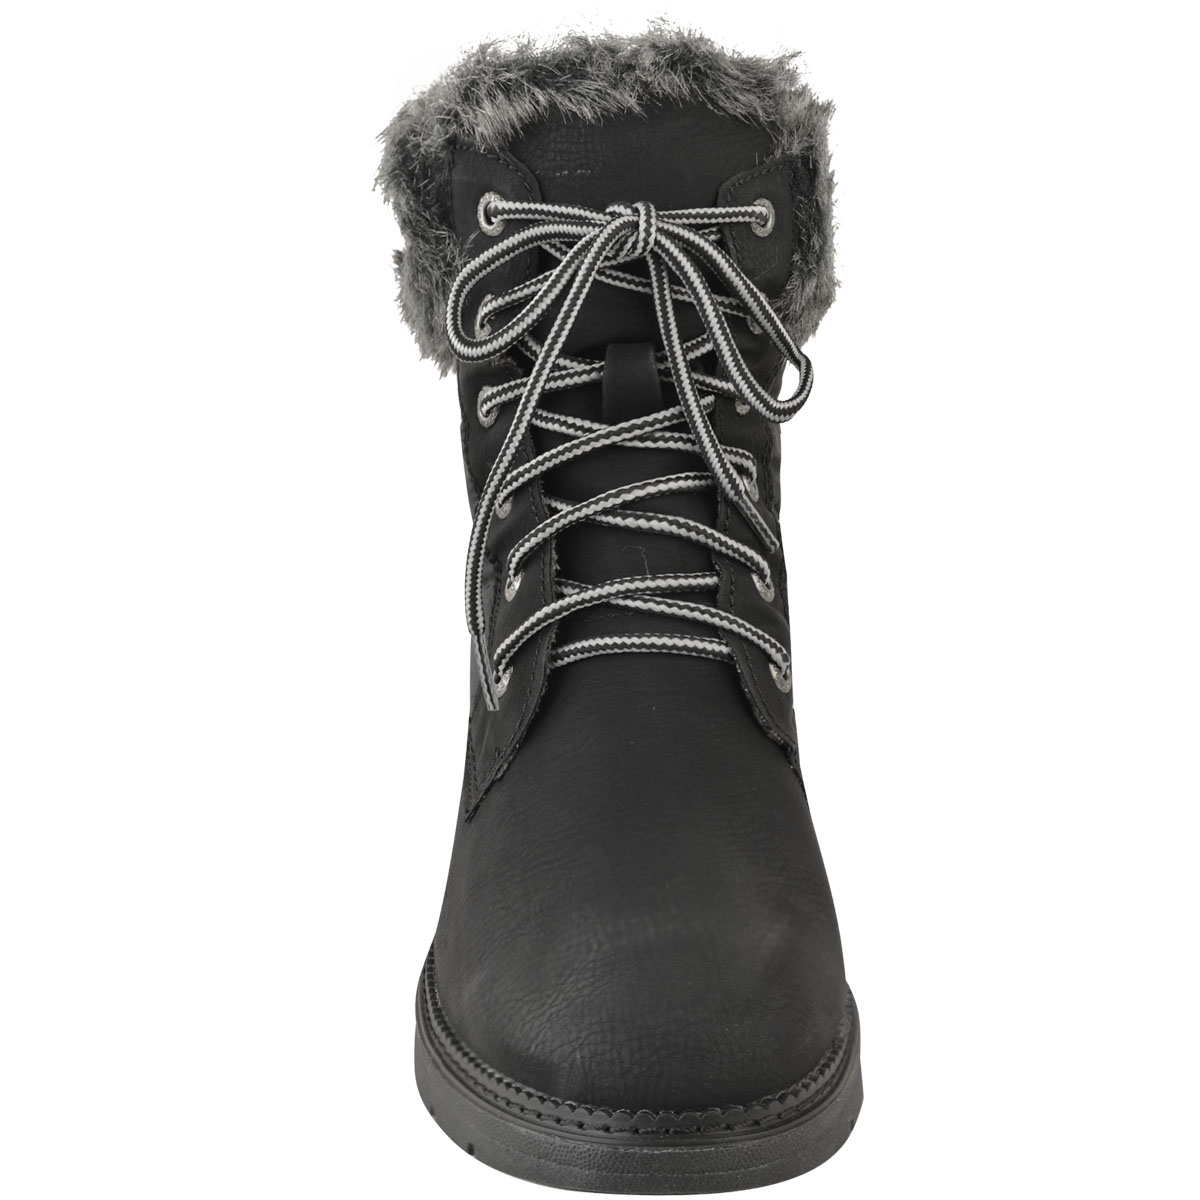 WOMENS WINTER ANKLE BOOTS WARM FUR 